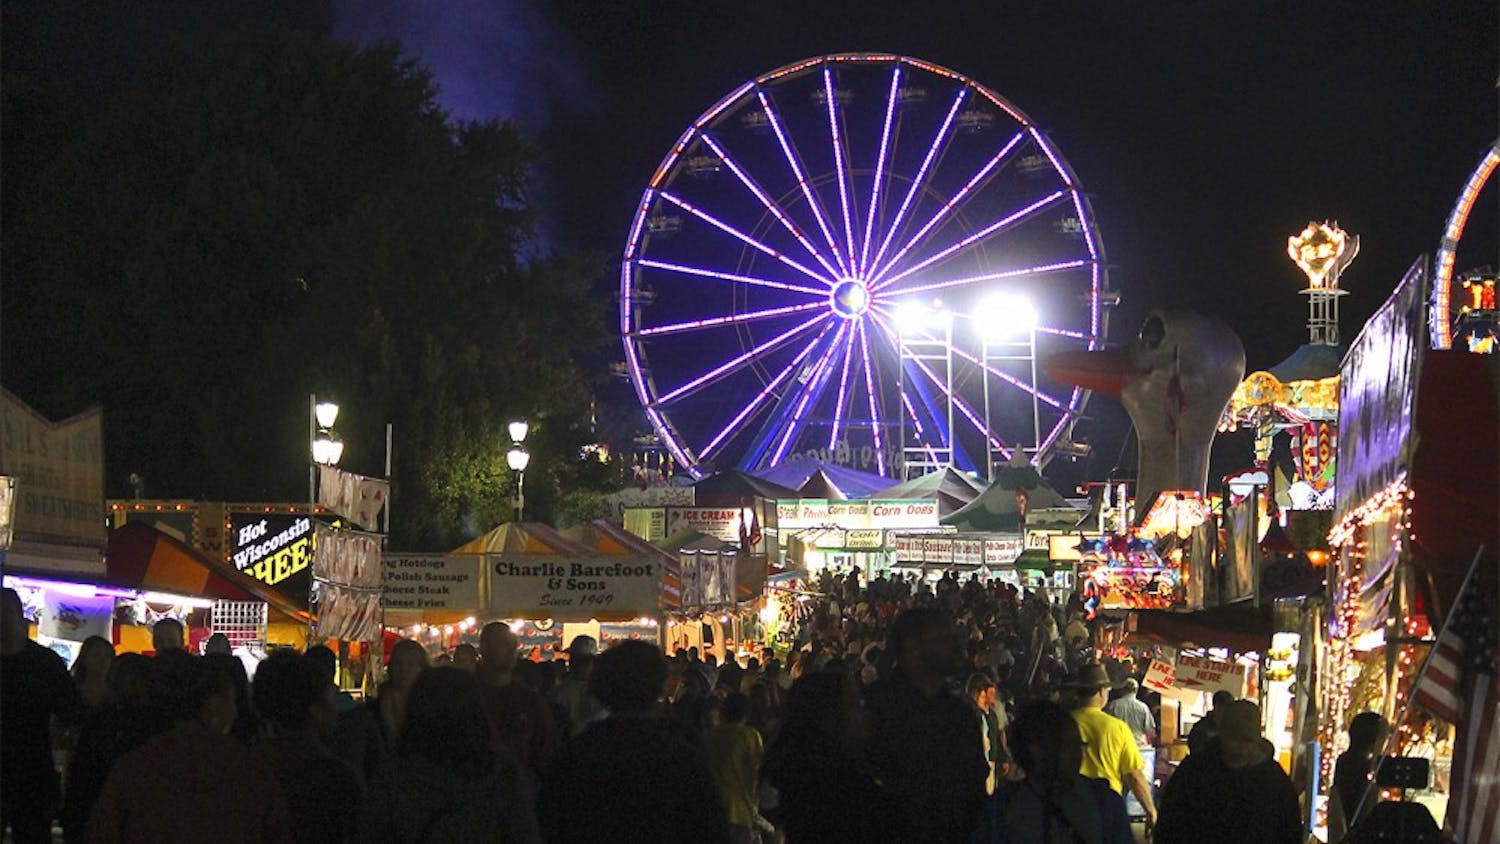 The N.C. State Fair is located on Blue Ridge Road in Raleigh and will be open until October 26th.